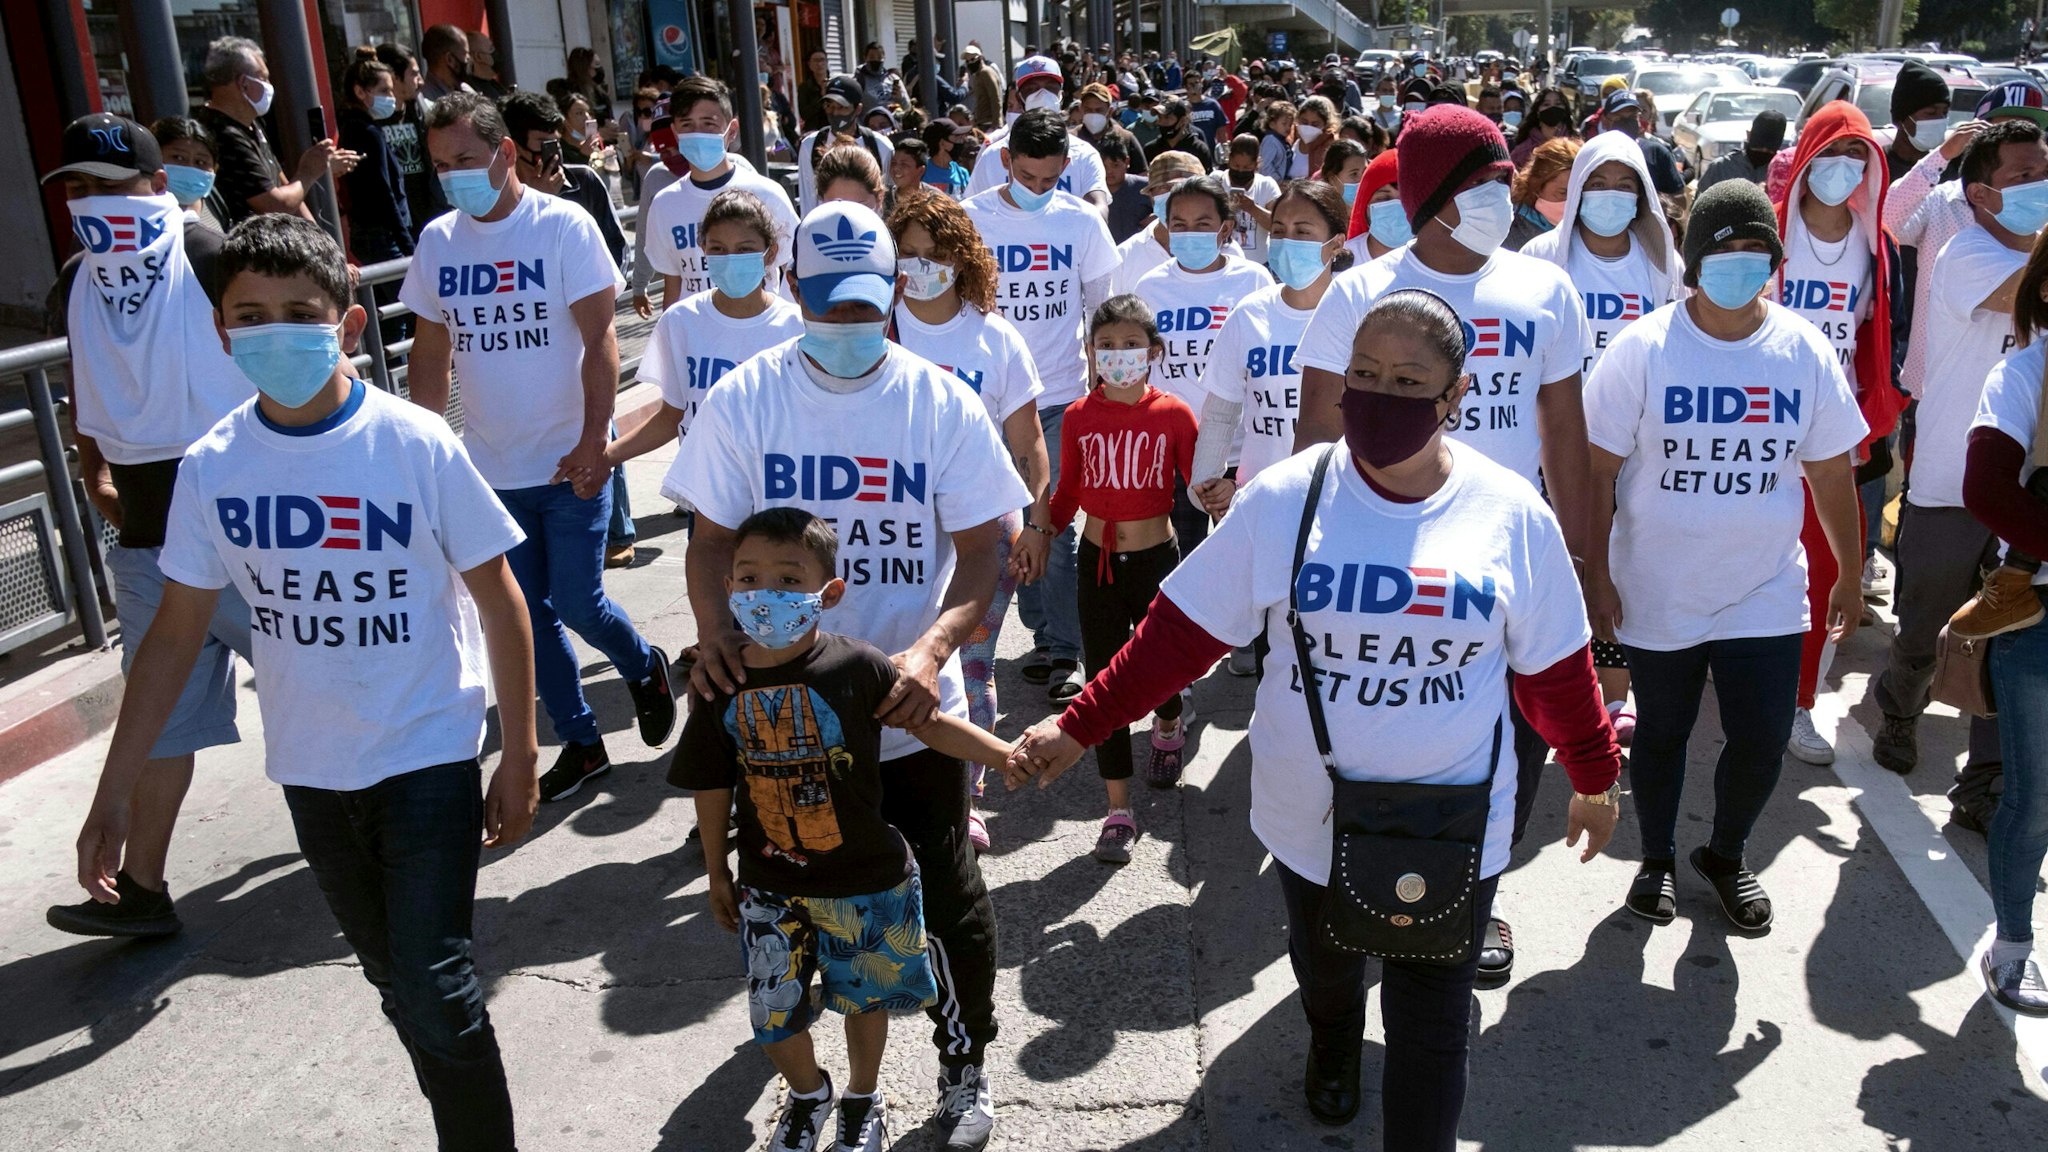 Migrants hold a demonstration demanding clearer United States migration policies, at San Ysidro crossing port in Tijuana, Baja California state, Mexico on March 2, 2021. - Thousands of migrants out of the Migrant Protection Protocol (MPP) program are stranded along the US-Mexico border without knowing when or how they will be able to start their migratory process with US authorities.